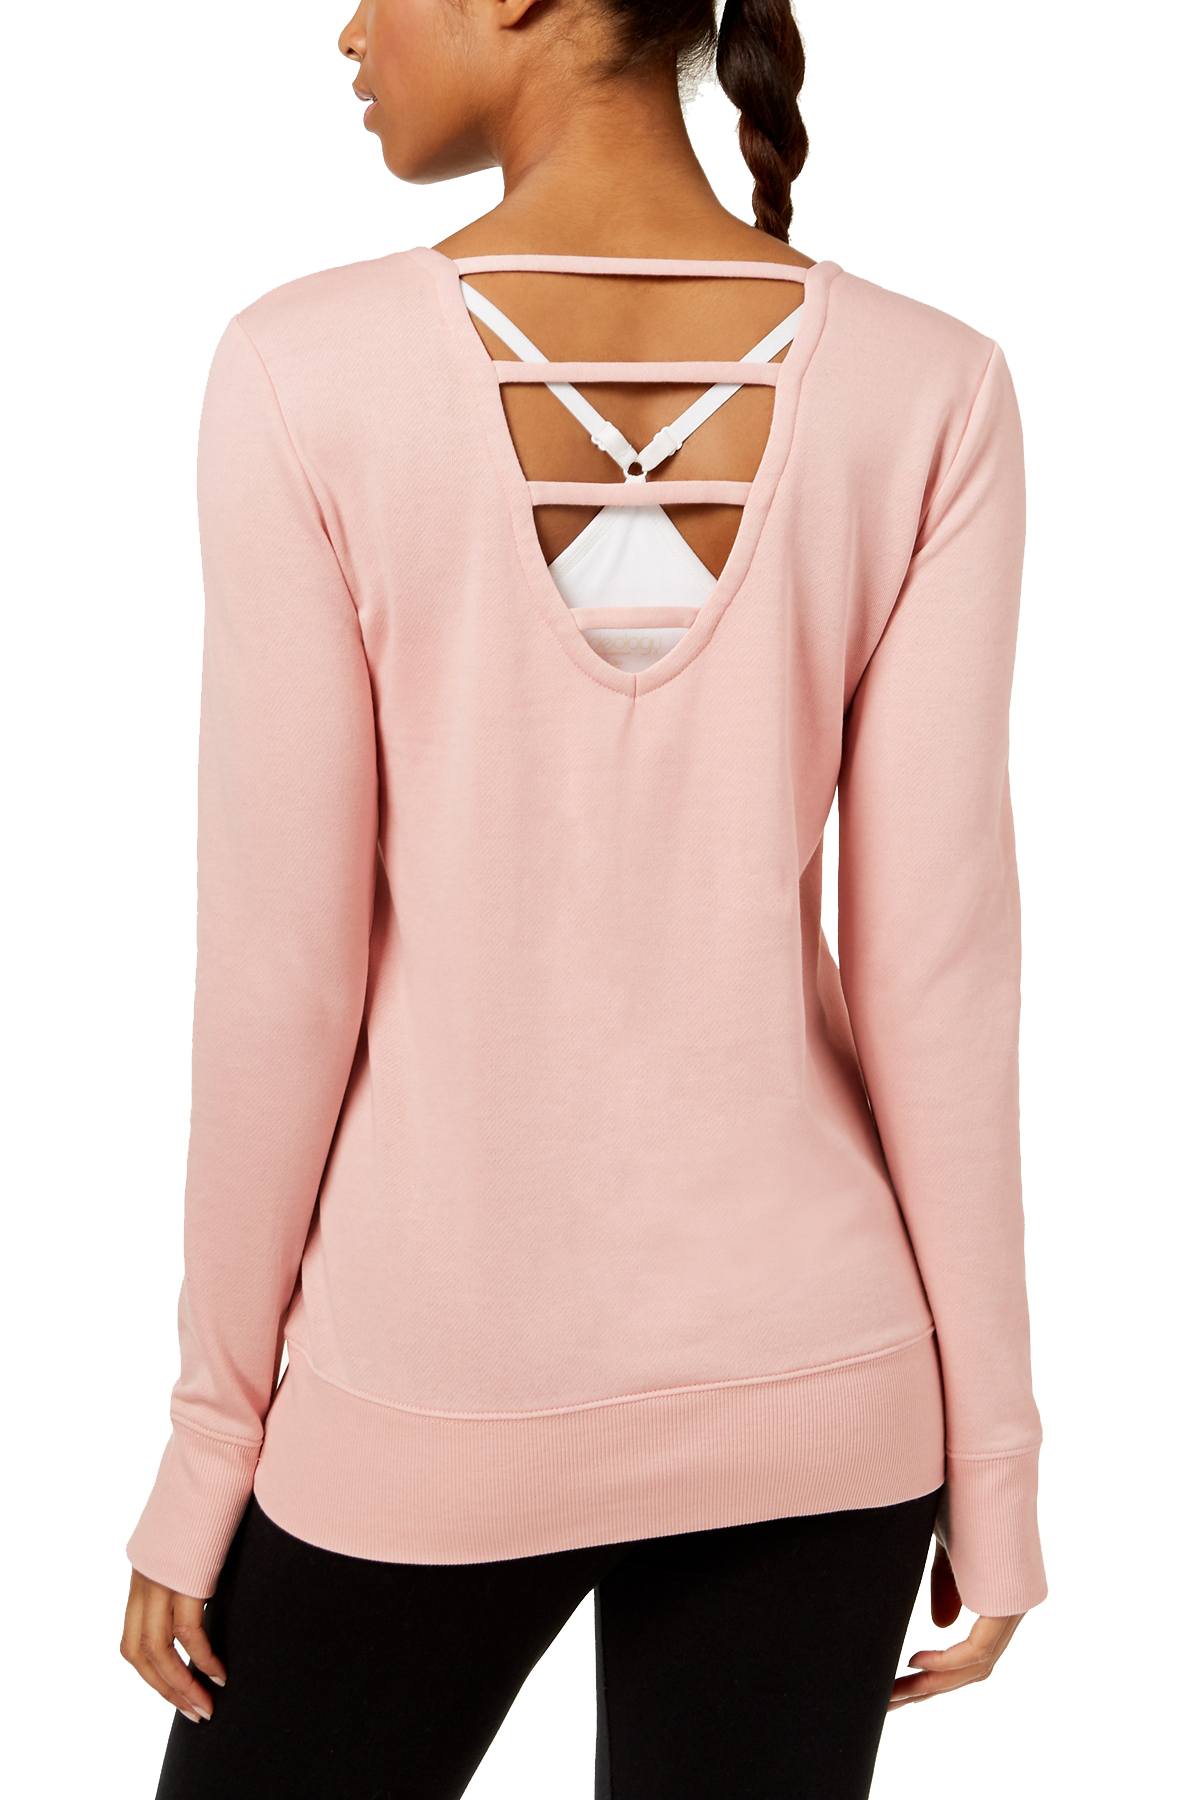 Ideology Shimmer-Pink Graphic Strappy-Back Sweatshirt